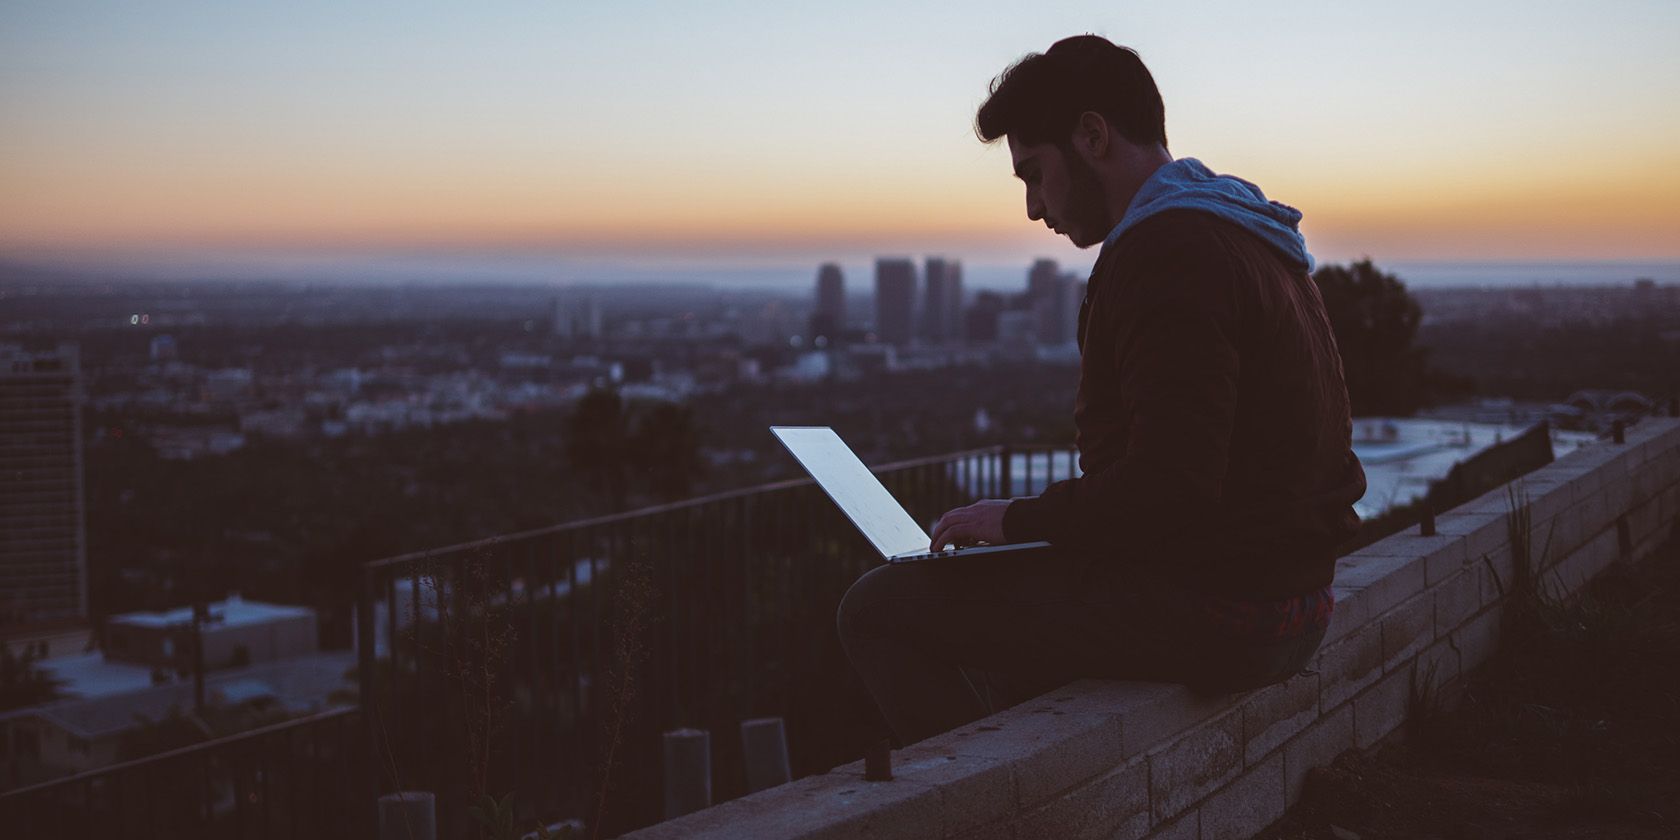 77 Tips and Resources To Make The Most of Remote Work